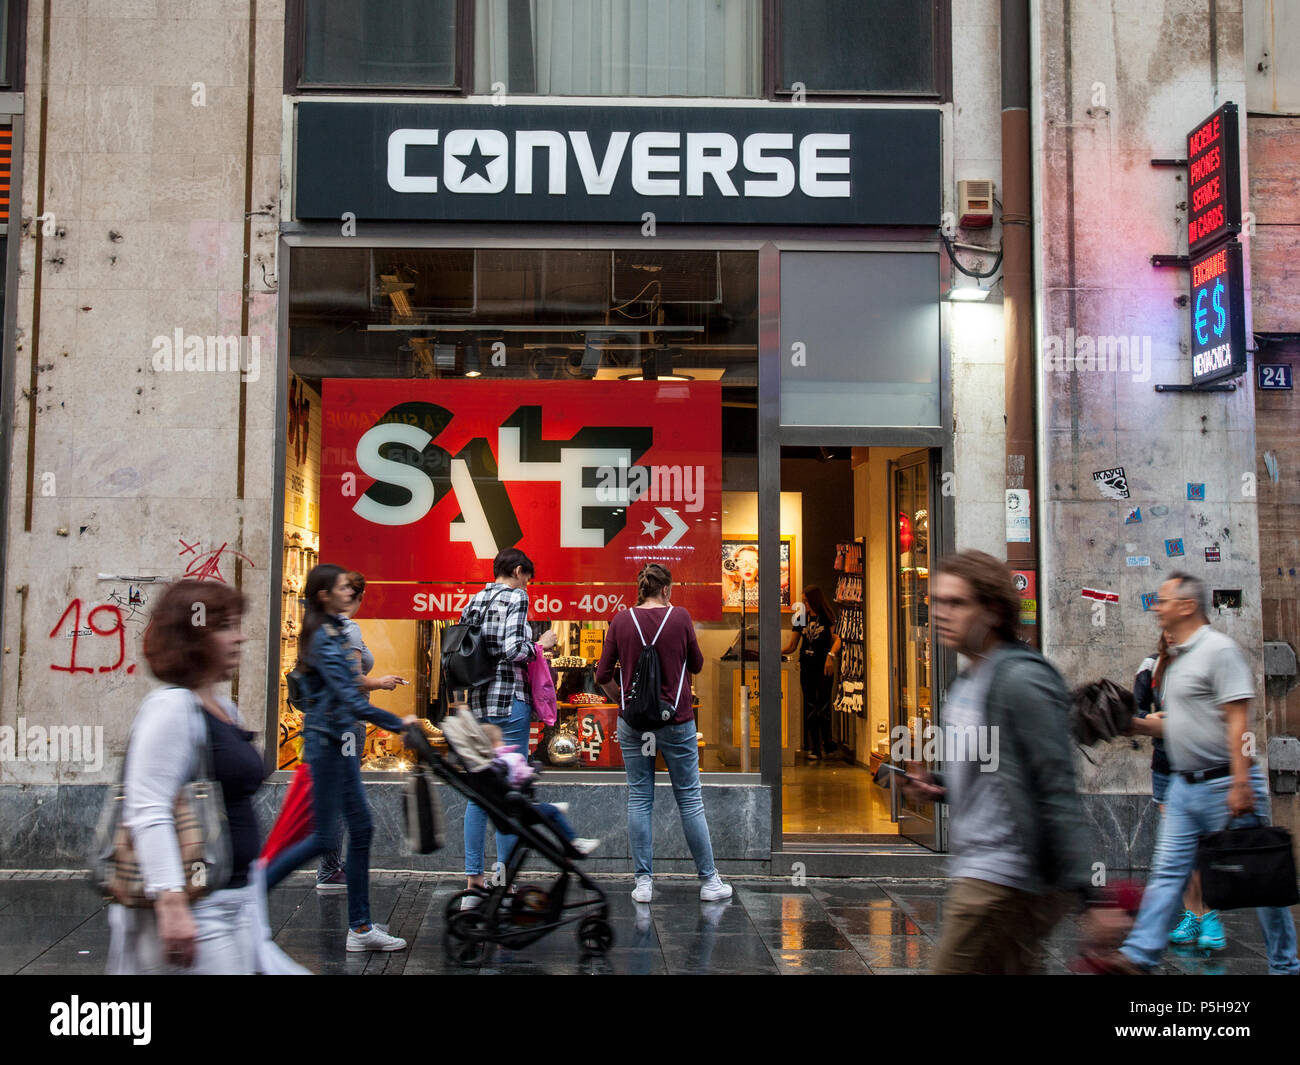 BELGRADE, SERBIA - JUNE 14, 2018: Logo of the main Converse store in  Belgrade. Converse is an American shoe and fashion company Picture of a  Conver Stock Photo - Alamy